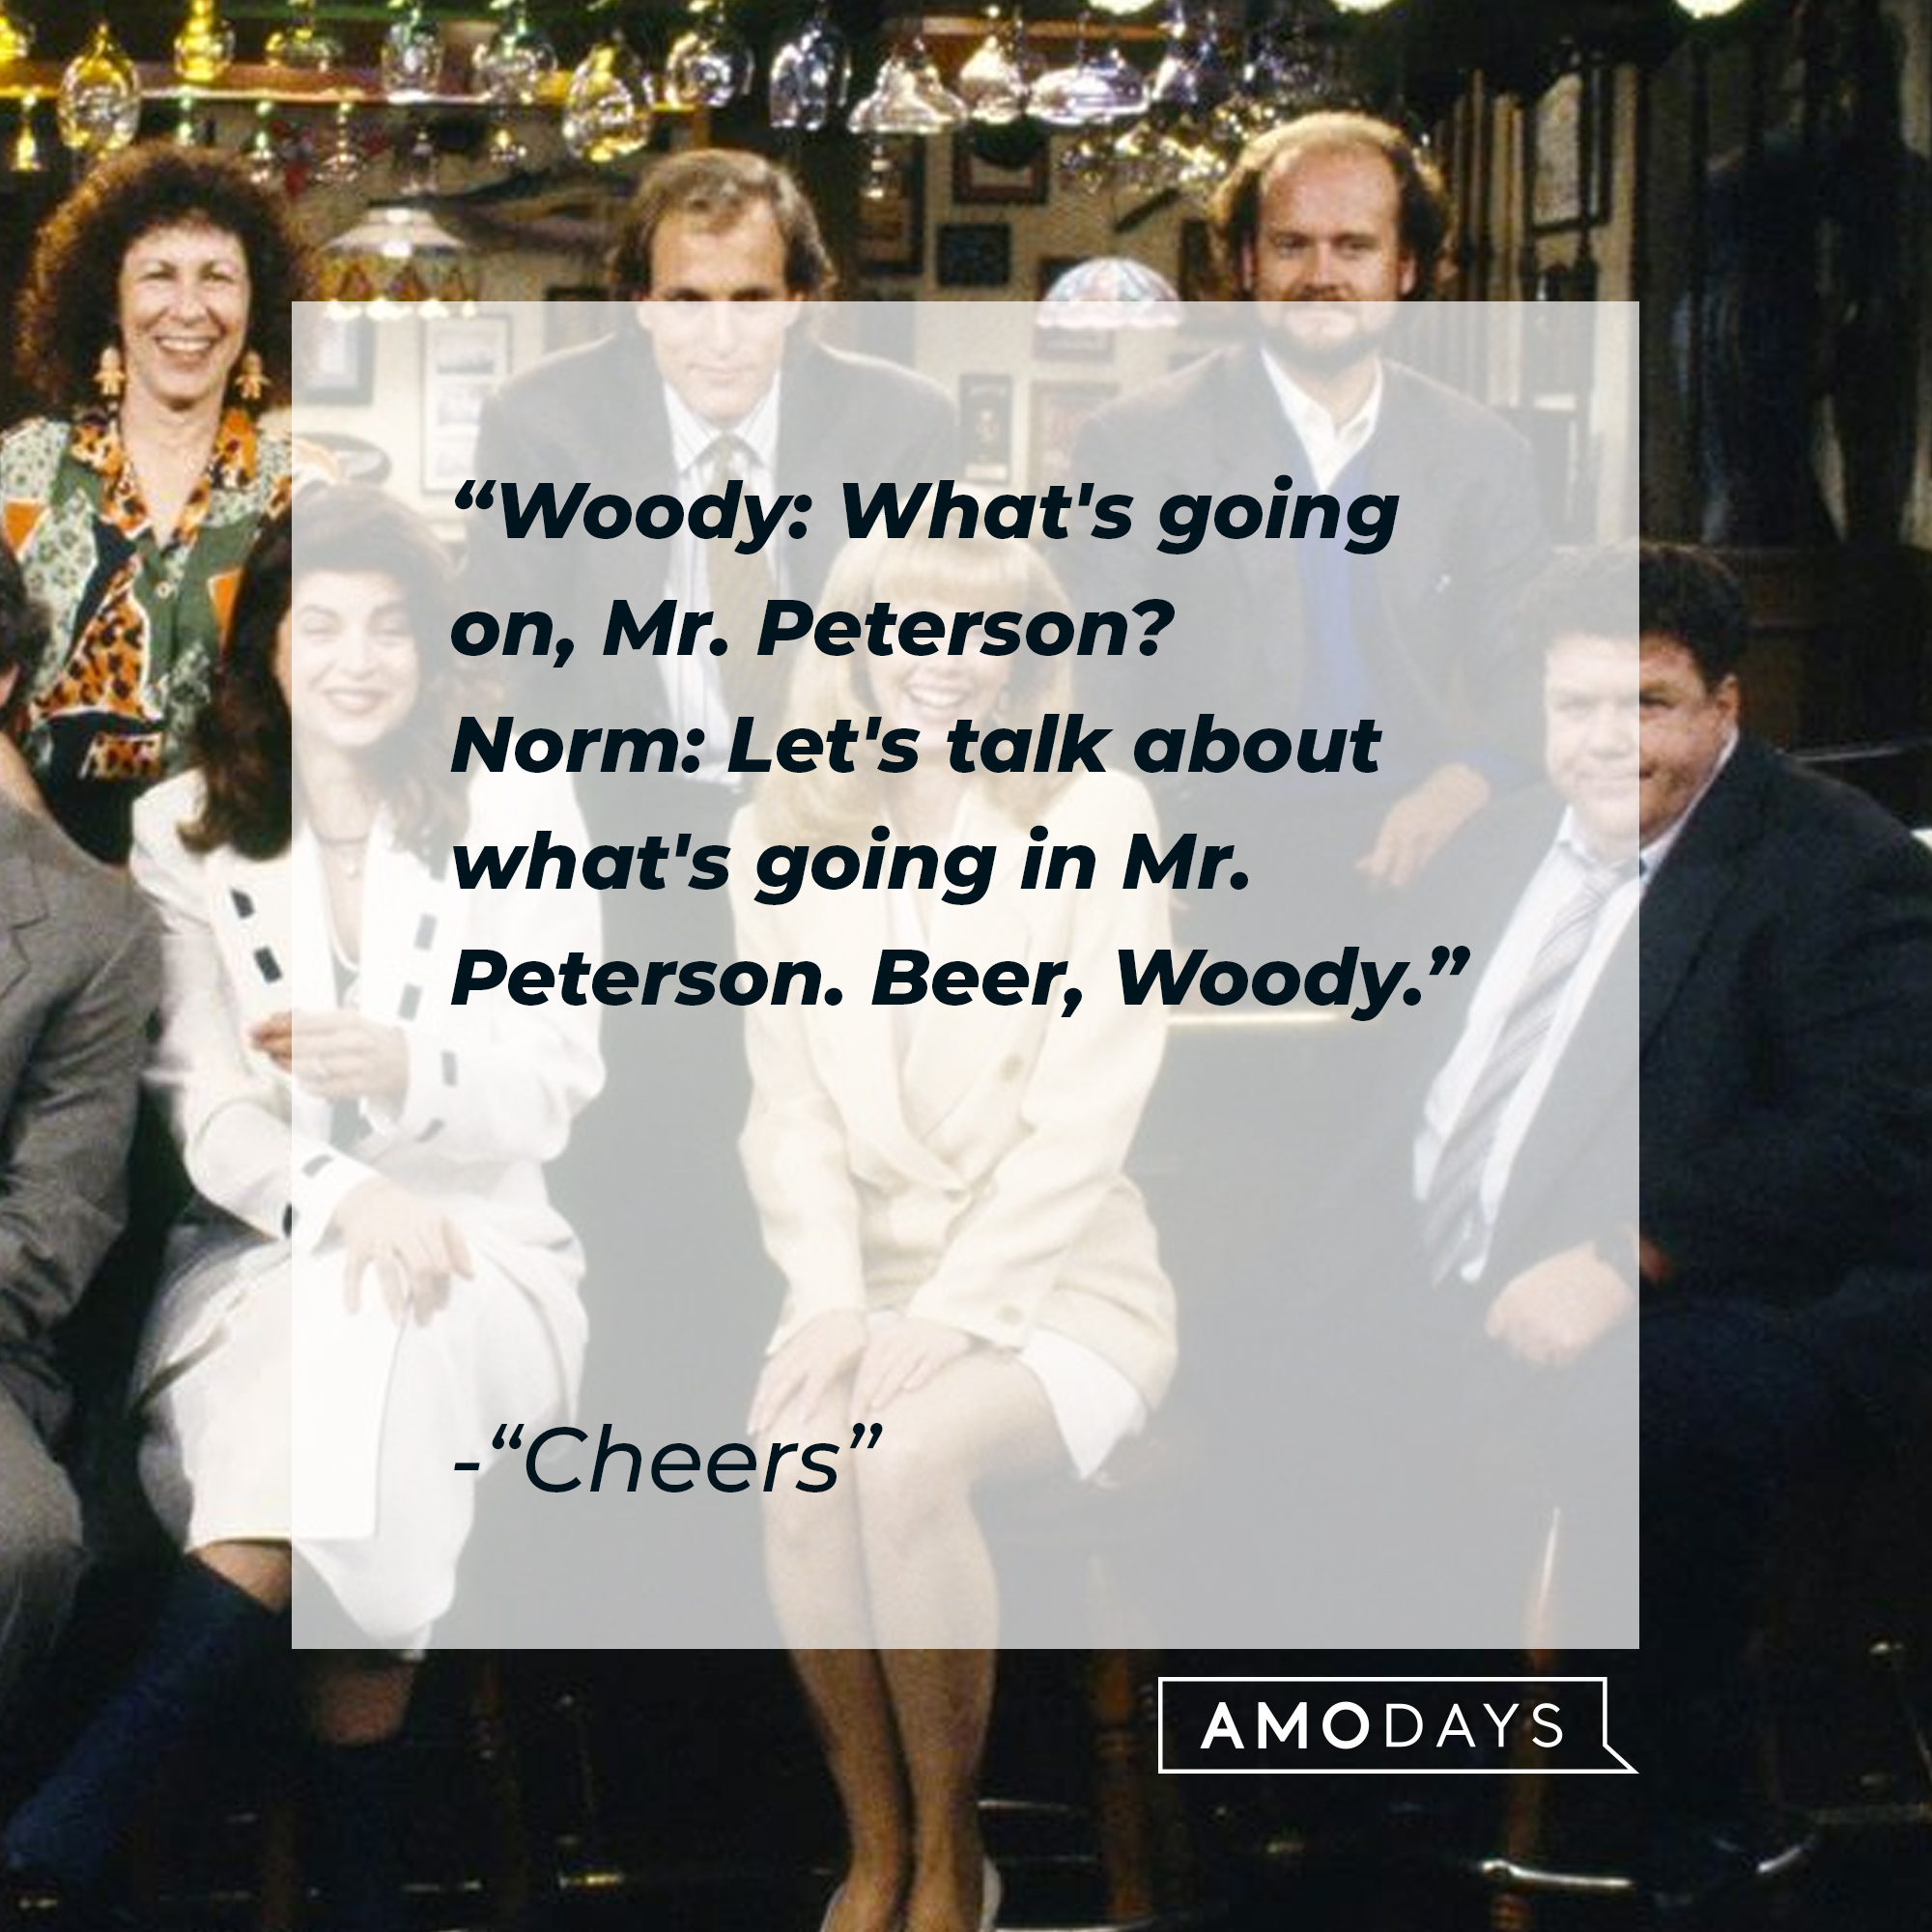 Norm Peterson with his quote: "Woody: What's going on, Mr. Peterson? ; Norm: Let's talk about what's going in Mr. Peterson. Beer, Woody." | Source: Facebook.com/Cheers